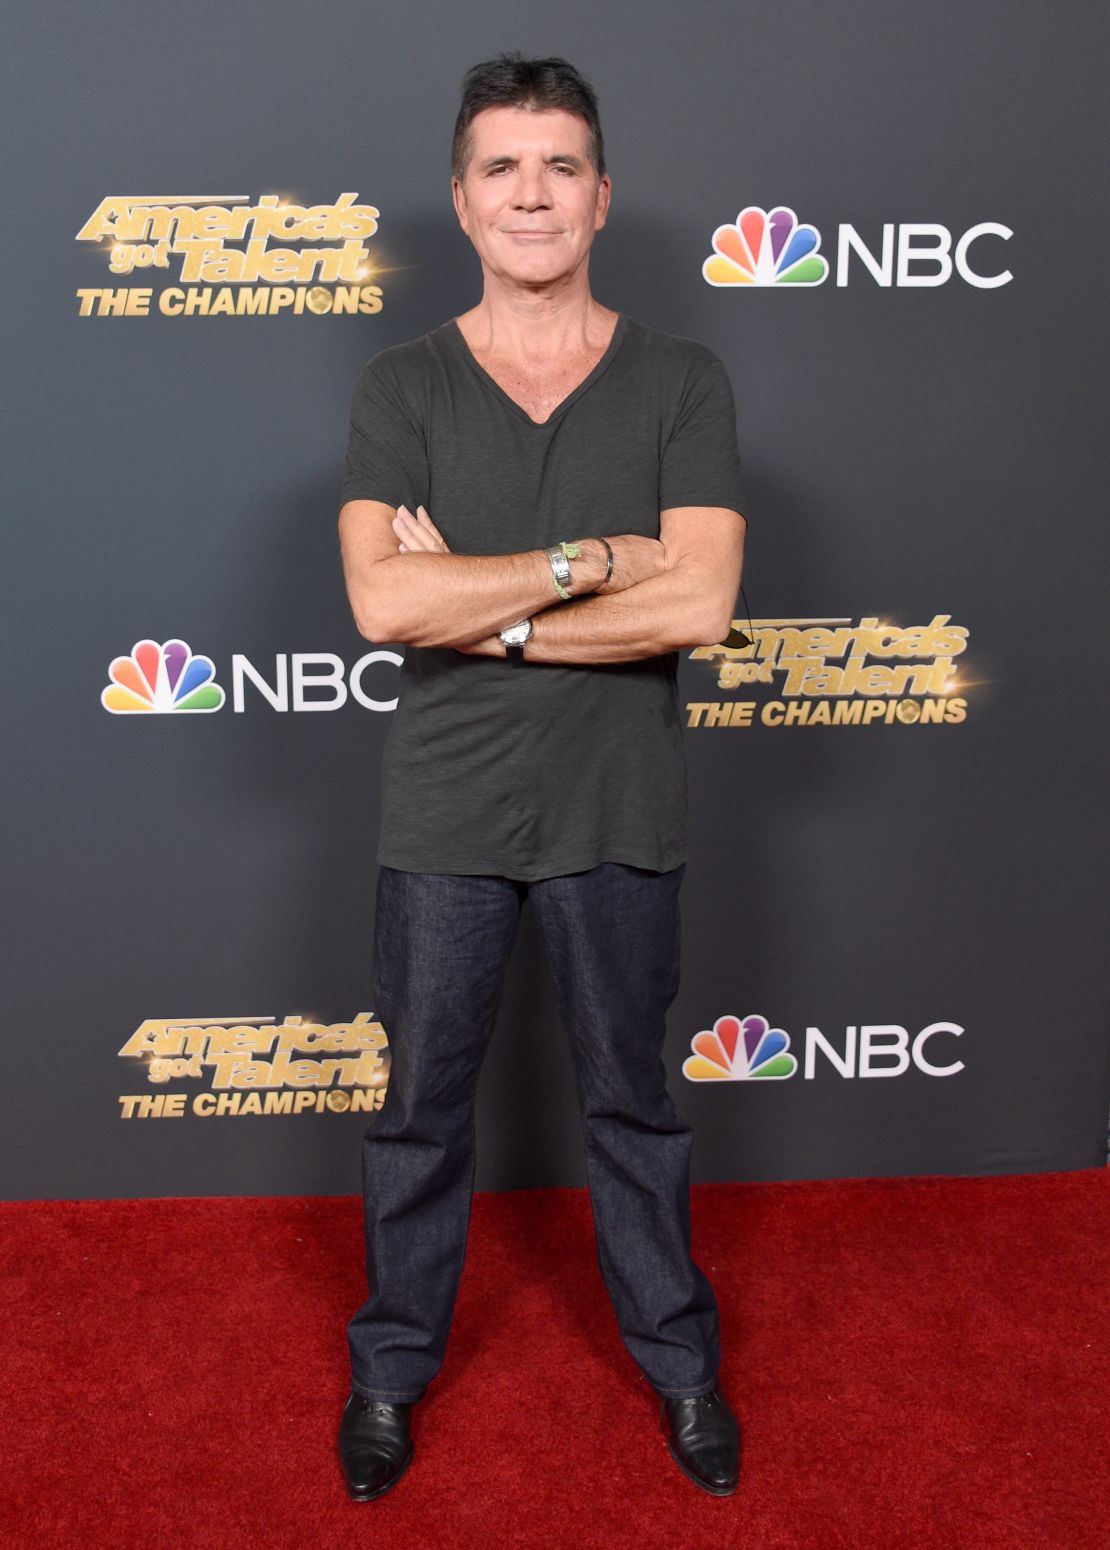 Simon Cowell, seen here at the premiere for "America's Got Talent: The Champions," wishes he had read the manual for his new electric bike.